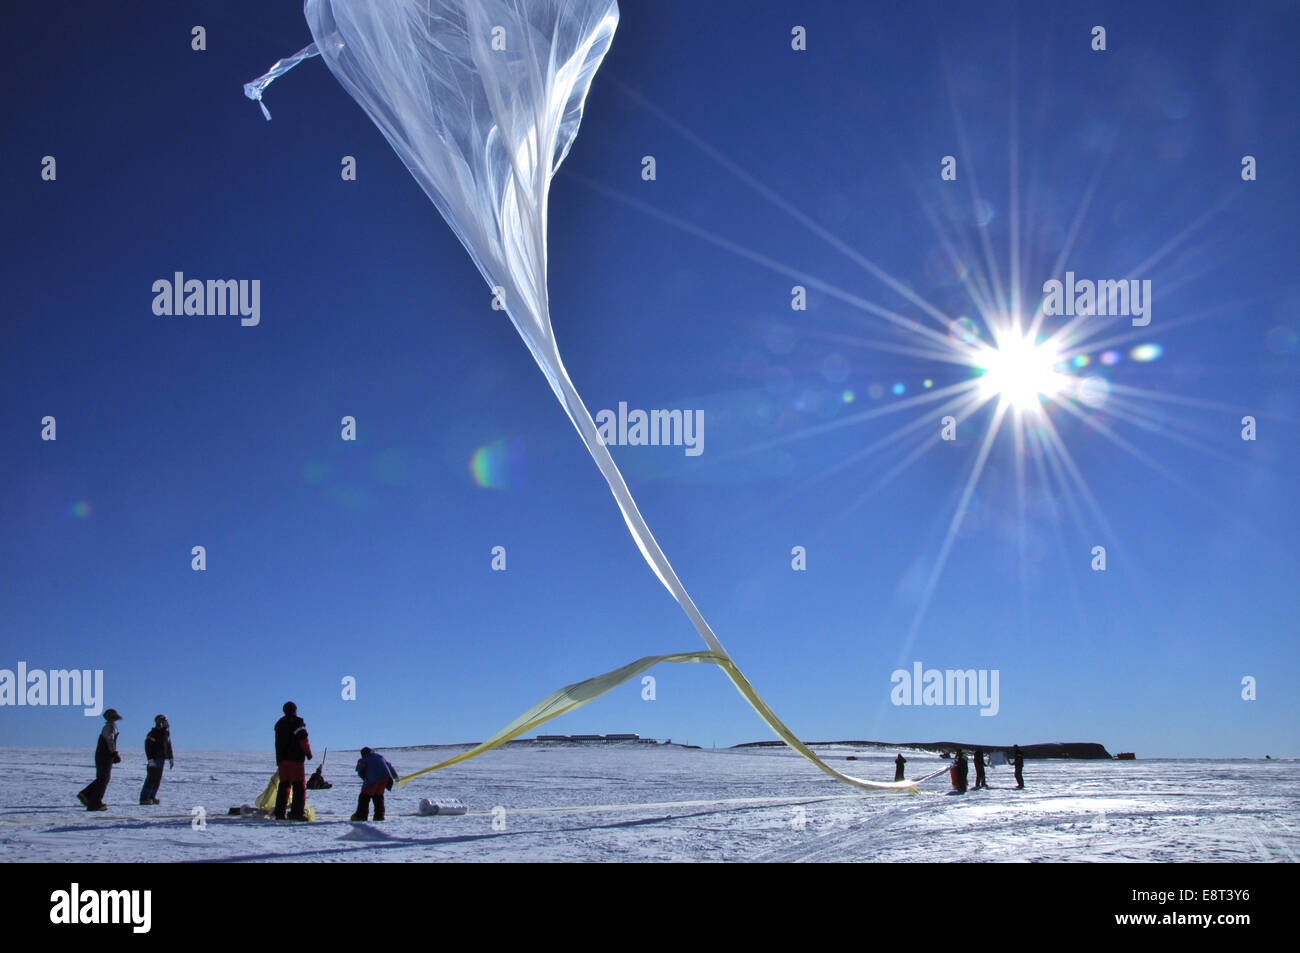 Some of the BARREL balloon launches took place at the South African National Antarctic Expedition Research base, called SANAE IV, the others at Halley Research Station. This balloon is taking flight at SANAE IV. Stock Photo